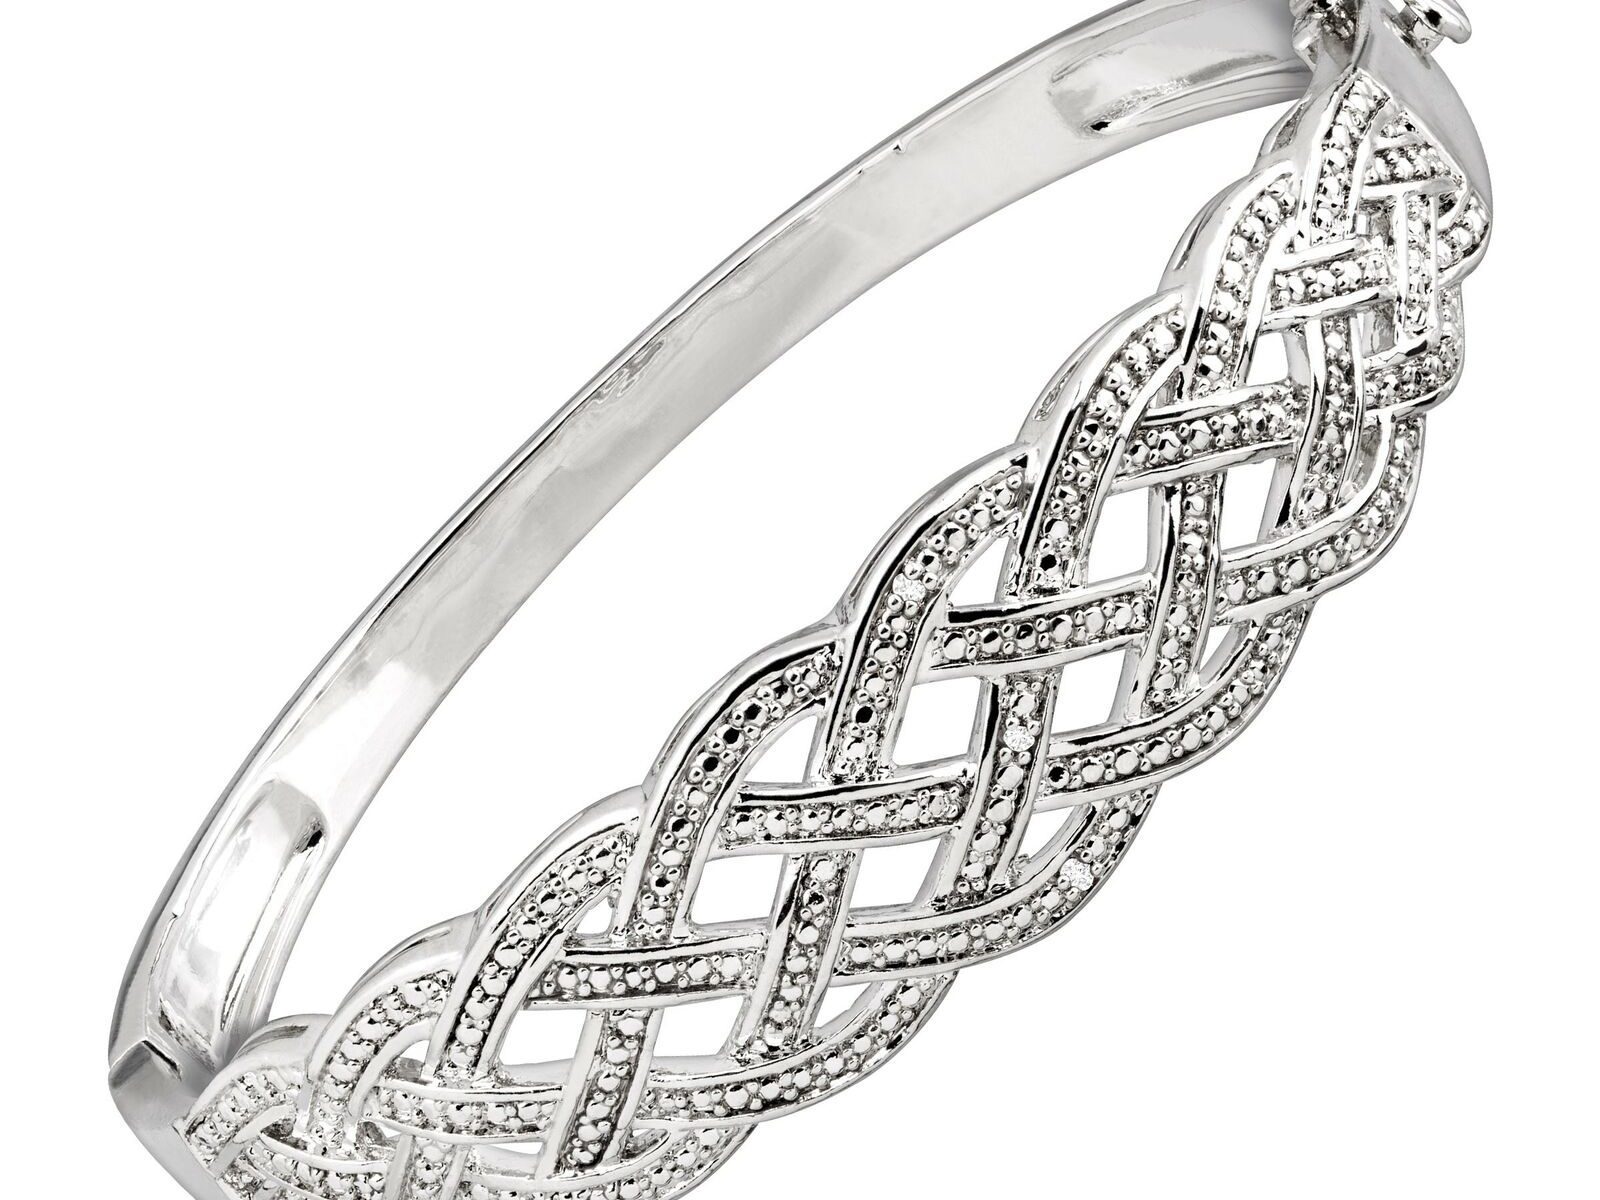 Woven Bangle Bracelet with Diamonds in Rhodium-Plated Brass